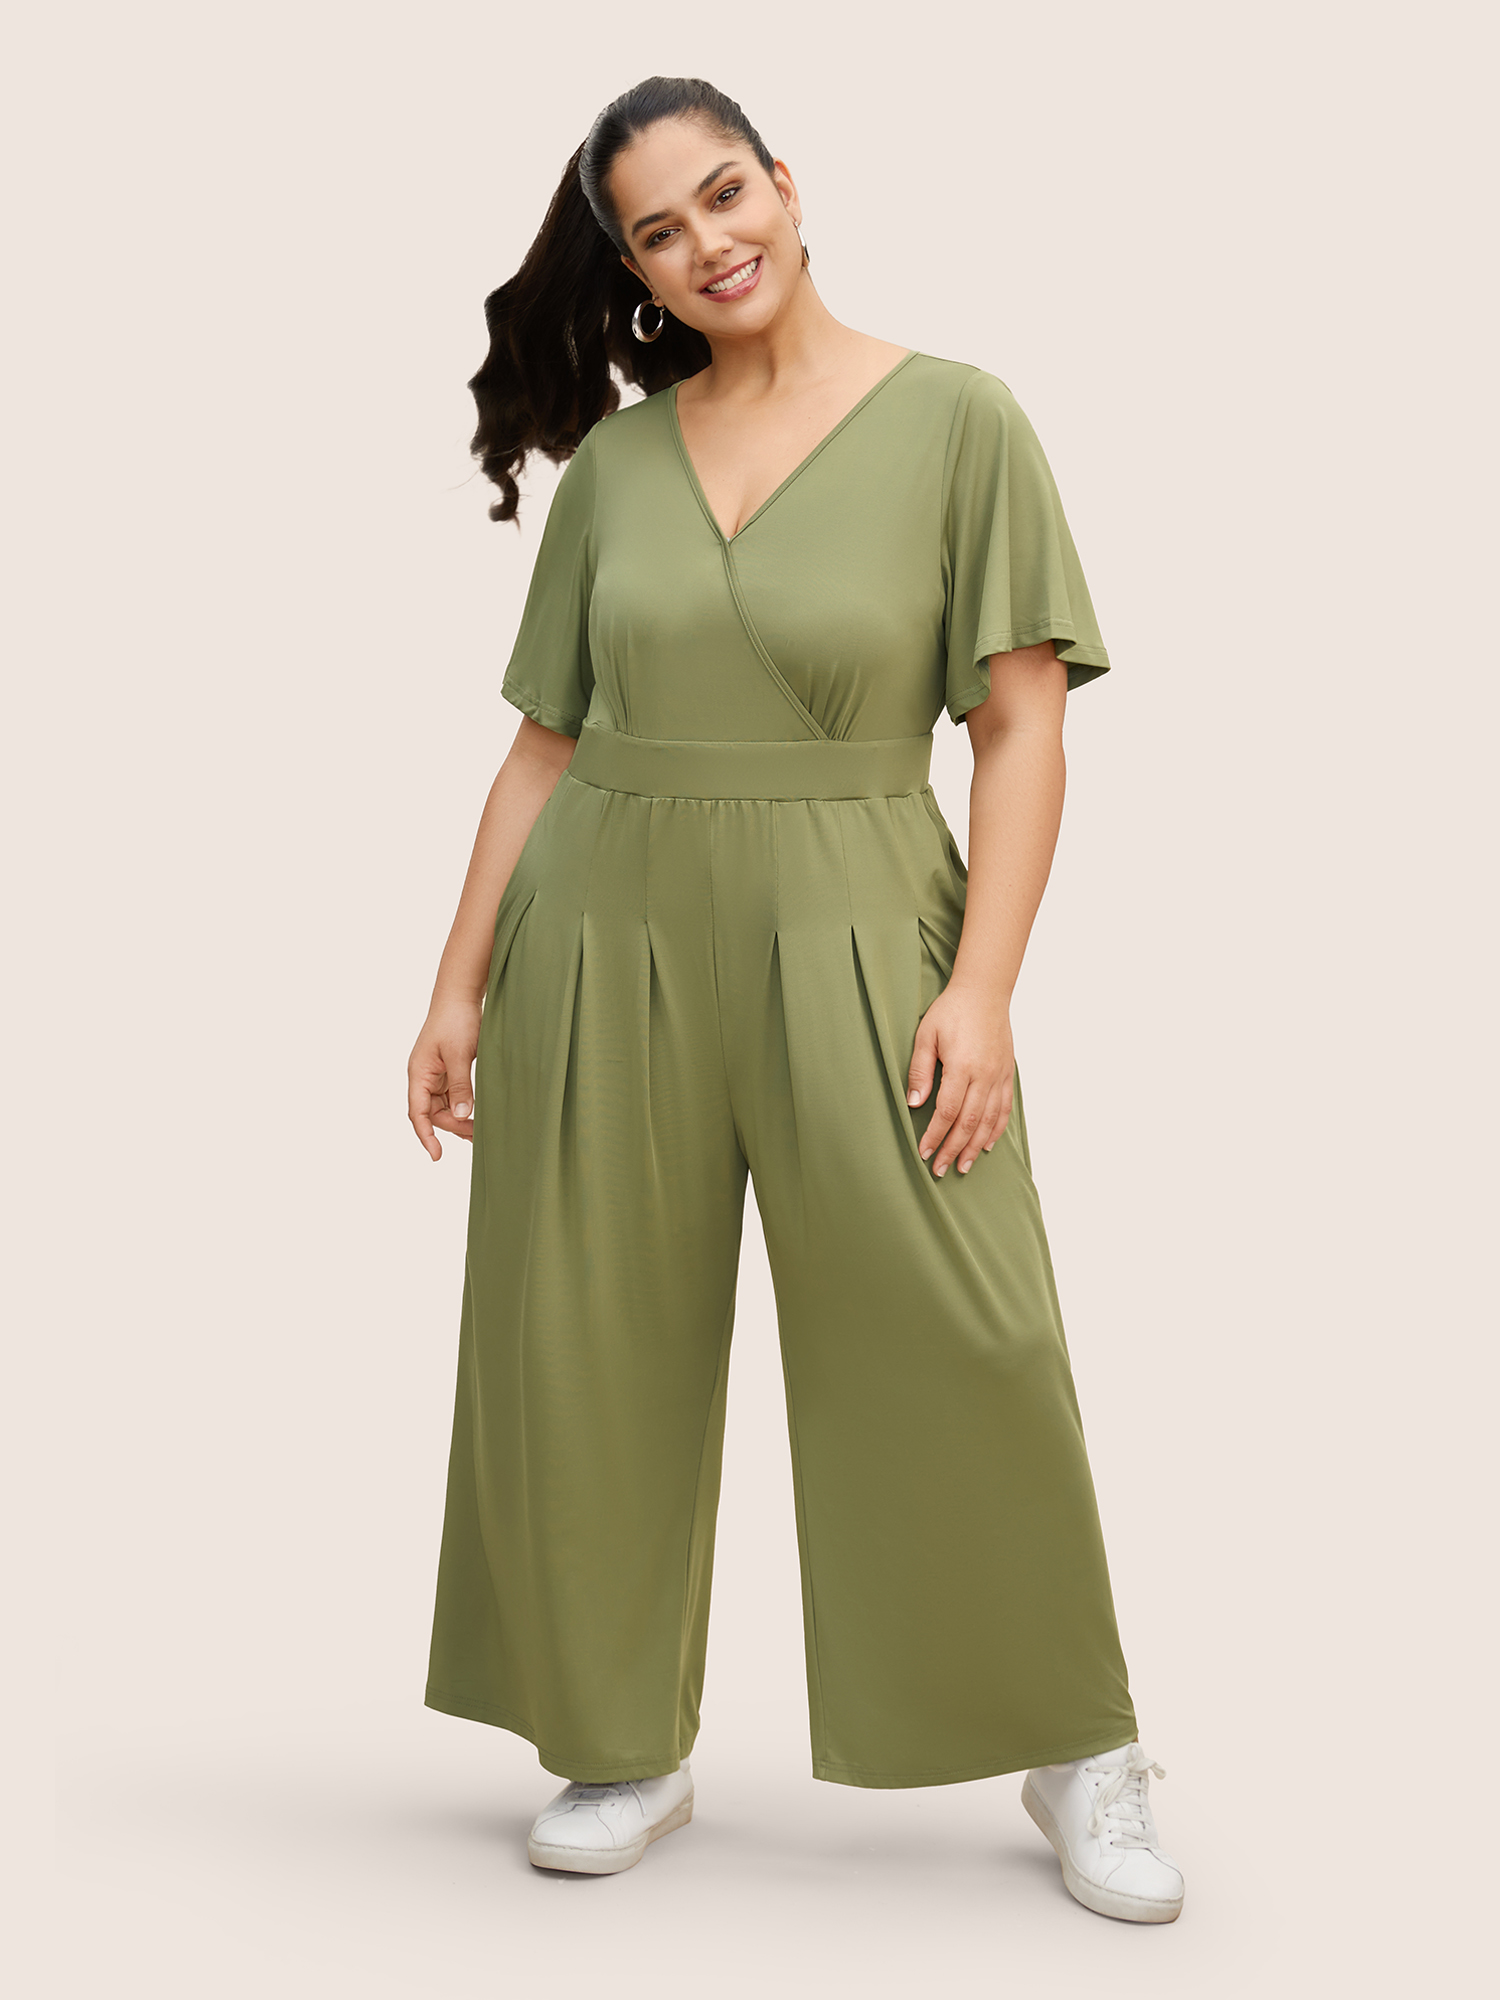 

Plus Size Olive Supersoft Essentials Plain Wrap Pleated Pocket Jumpsuit Women Casual Short sleeve V-neck Everyday Loose Jumpsuits BloomChic